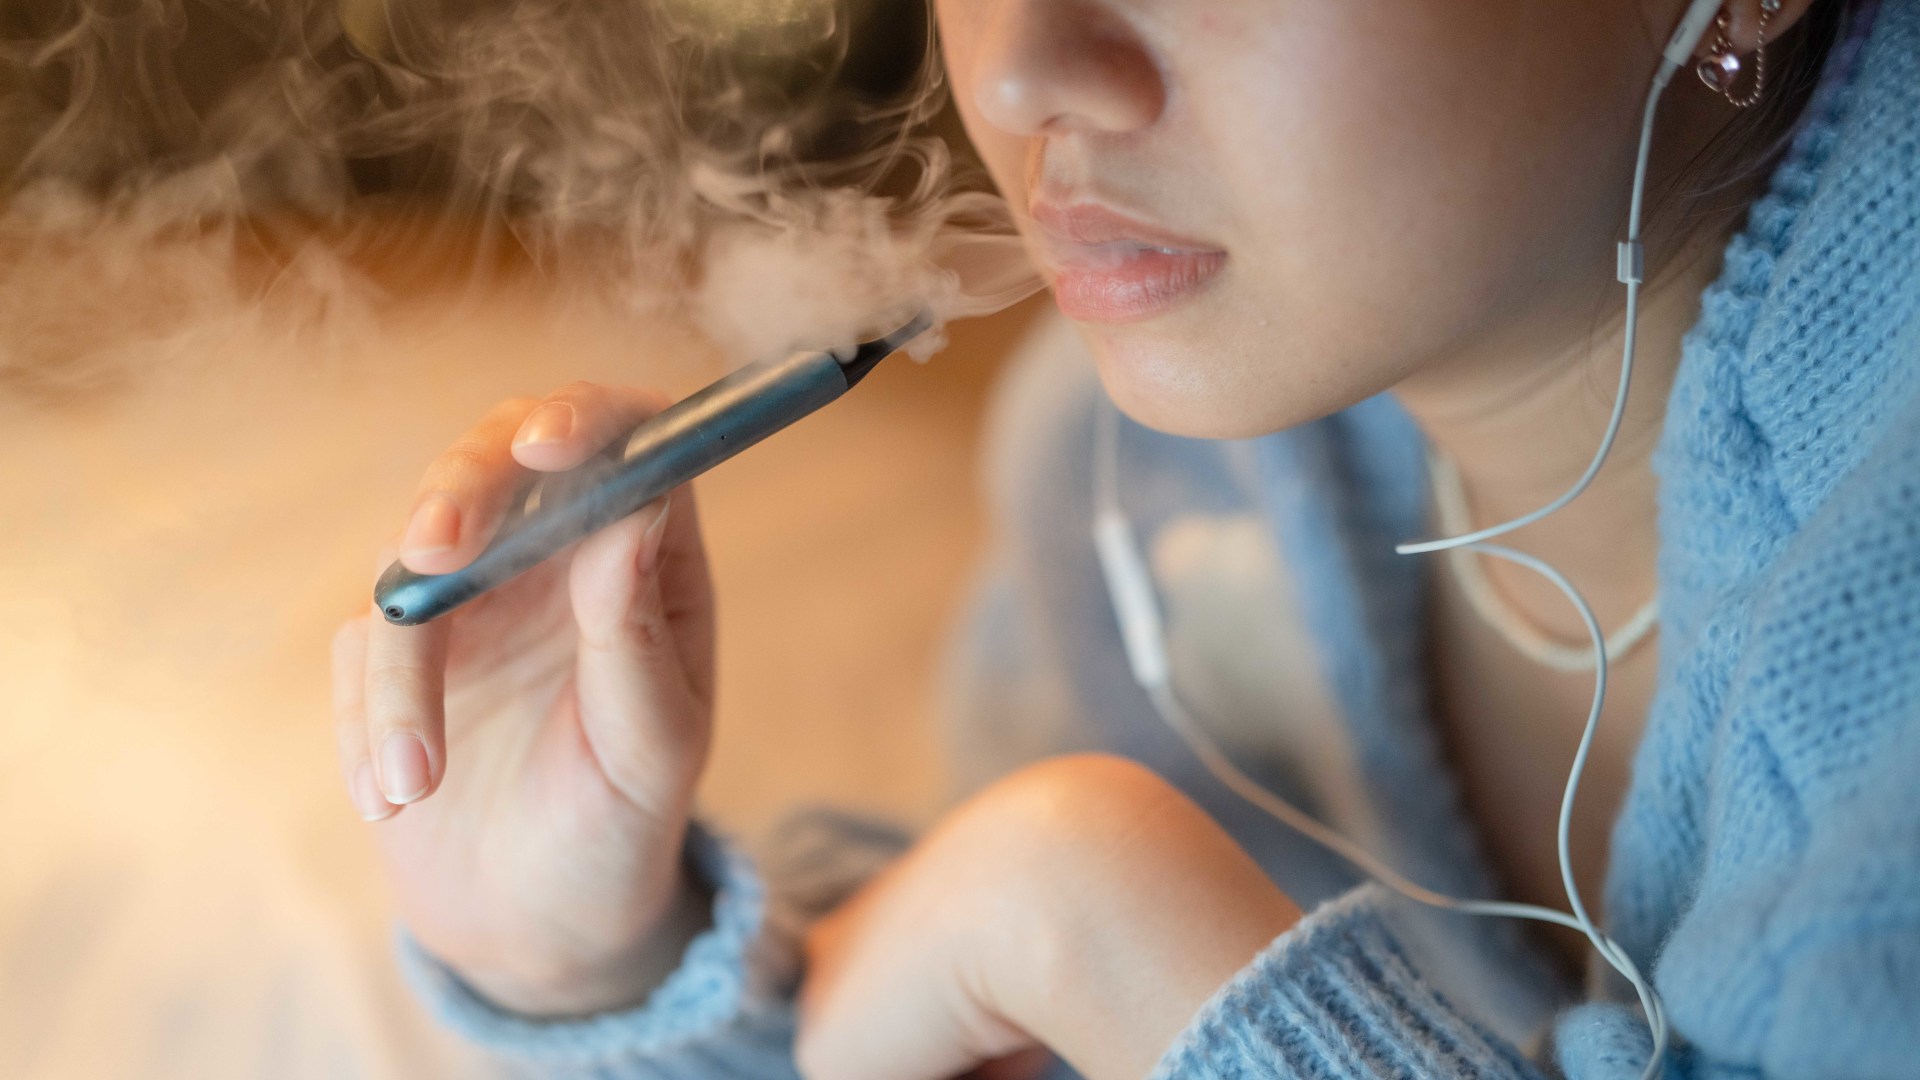 Urgent warning as school children could be smoking vapes ‘spiked with street drug’ that can cause cardiac arrest [Video]